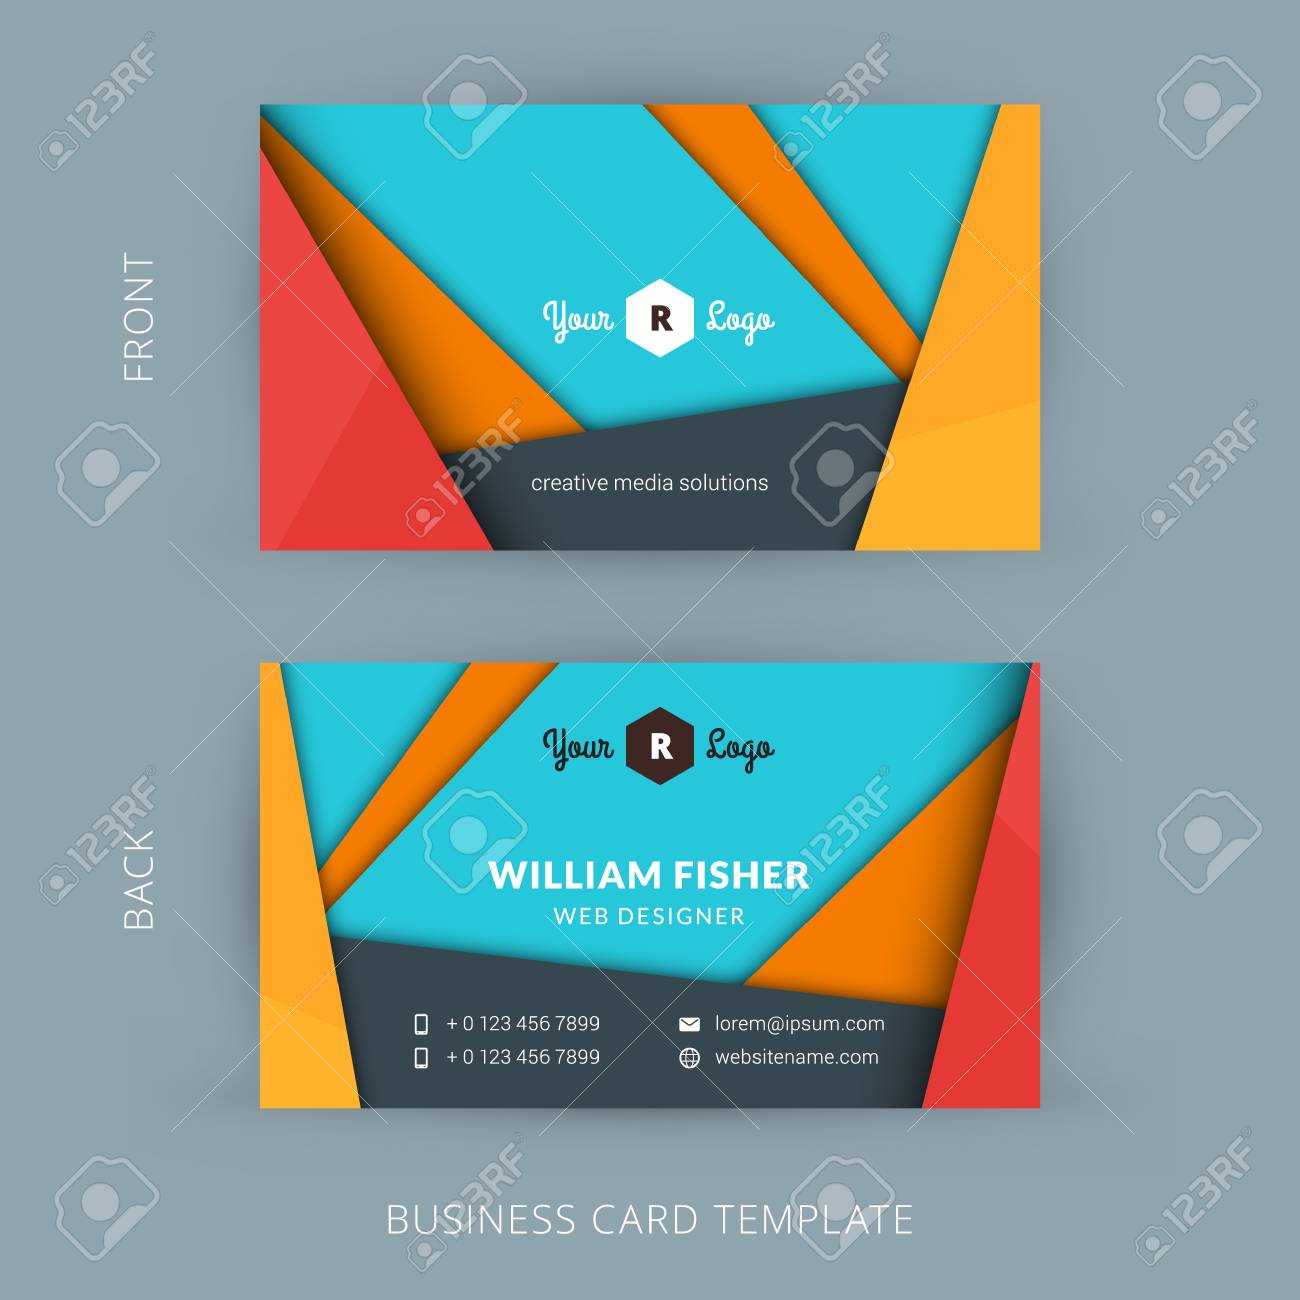 Creative And Clean Business Card Template With Material Design.. With Web Design Business Cards Templates